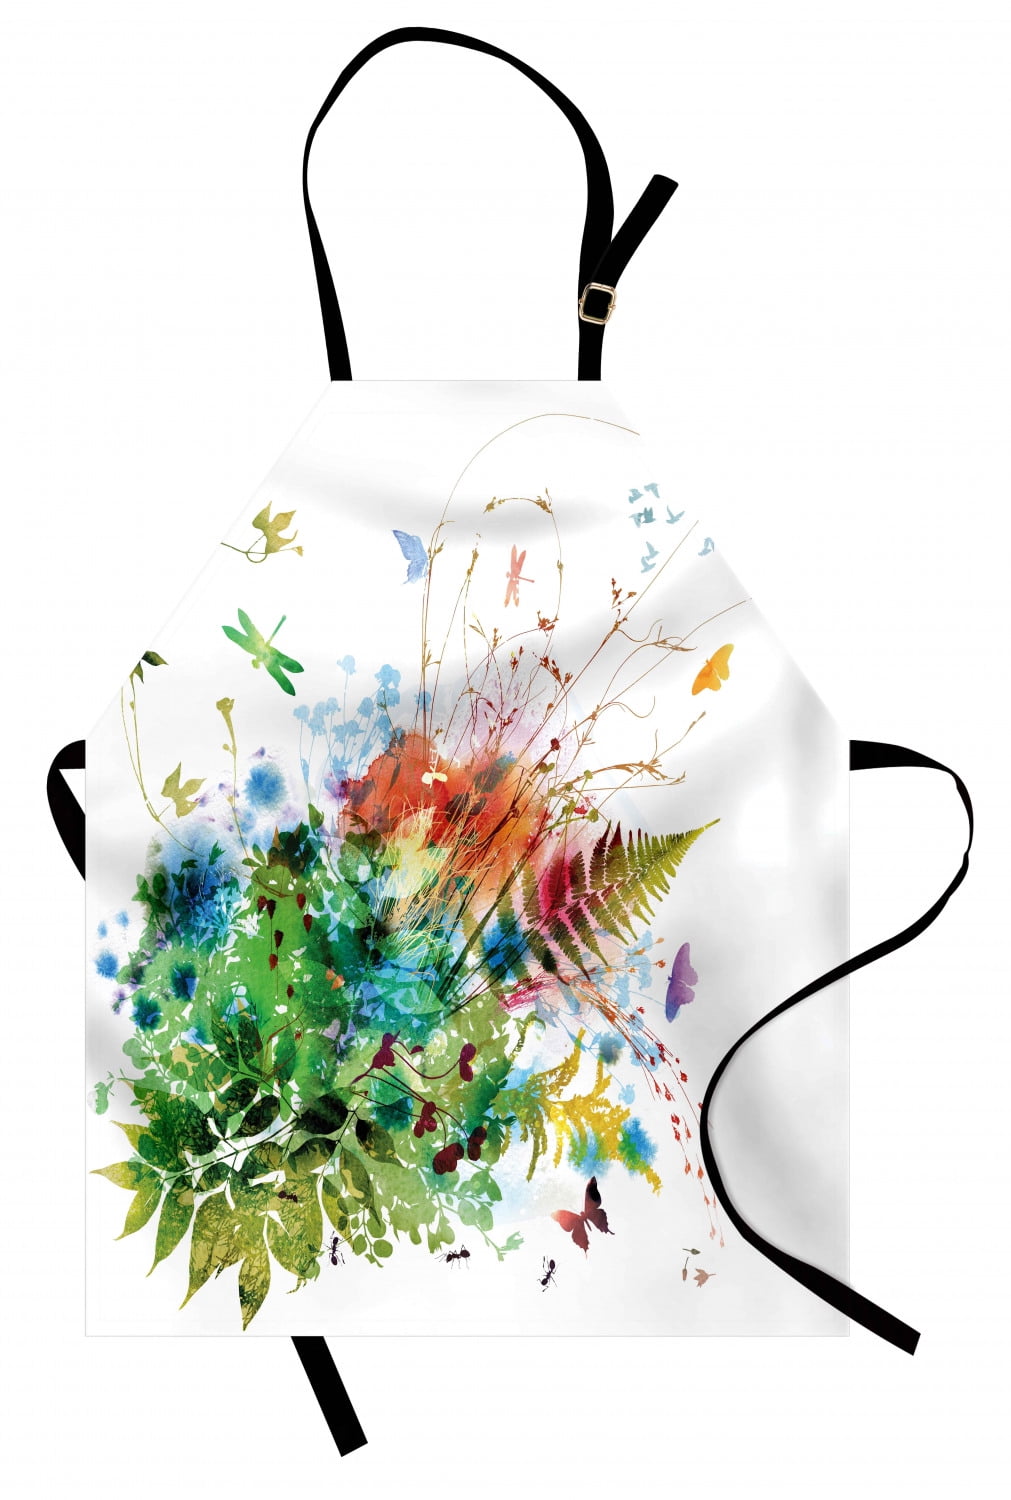 Adult Size Unisex Kitchen Bib with Adjustable Neck for Cooking Gardening Colorful Butterflies Flying Composition Summertime Seasonal Animals Print Blue Black Ambesonne Animal Apron